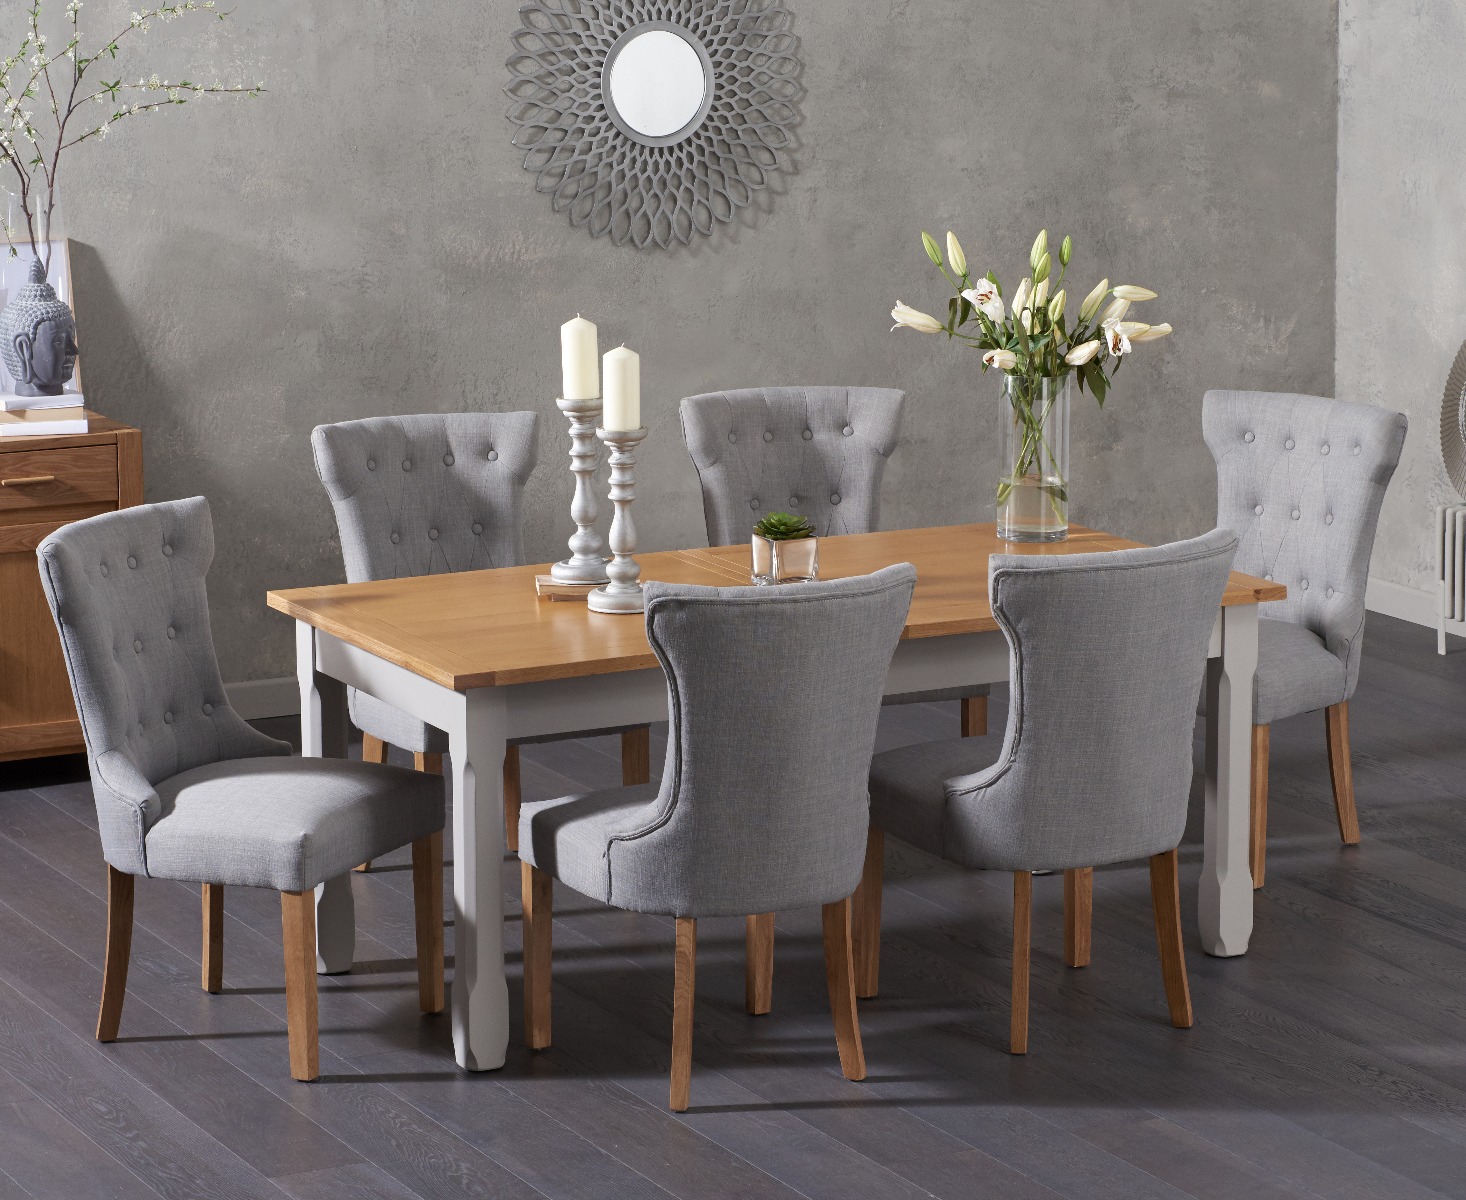 Make Your Dining Area A Comfortable And Stylish Place To Be With The Somerset 180cm Oak And Grey Extending Dining Table With Camille Grey Fabric Chairs Combining An Extending Painted Table With